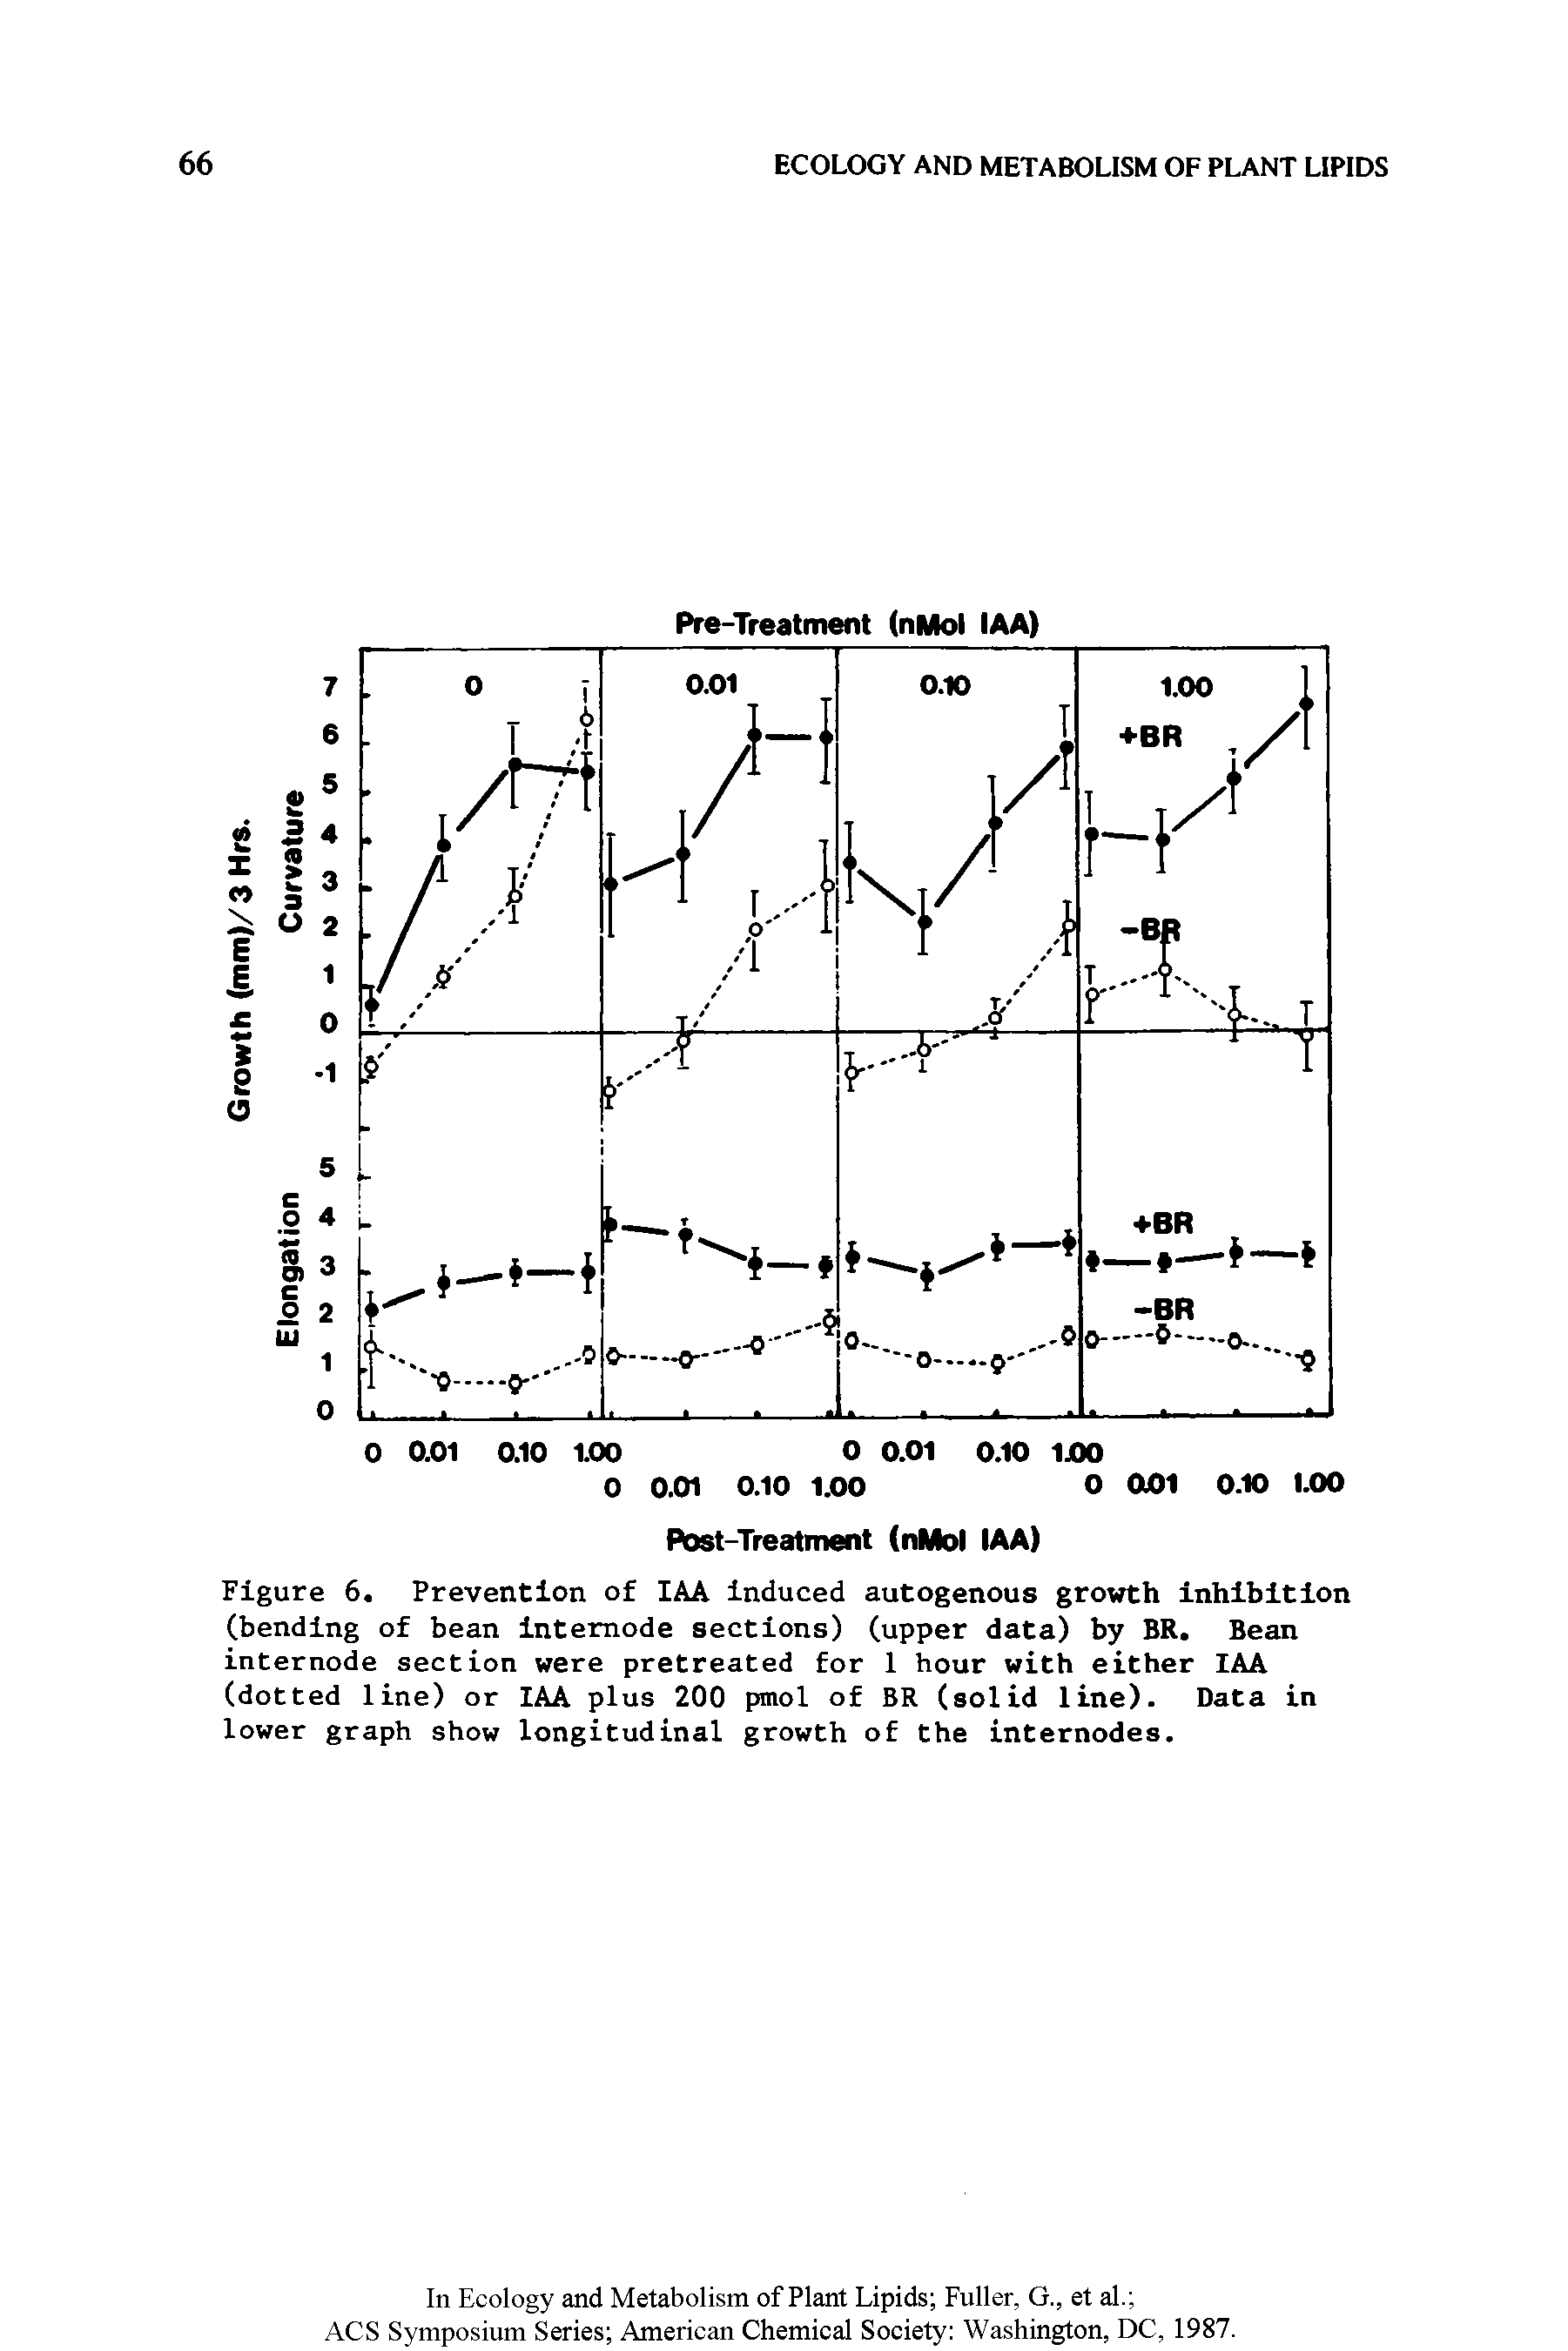 Figure 6. Prevention of lAA induced autogenous growth inhibition (bending of bean intemode sections) (upper data) by BR. Bean internode section were pretreated for 1 hour with either lAA (dotted line) or lAA plus 200 pmol of BR (solid line). Data in lower graph show longitudinal growth of the internodes.